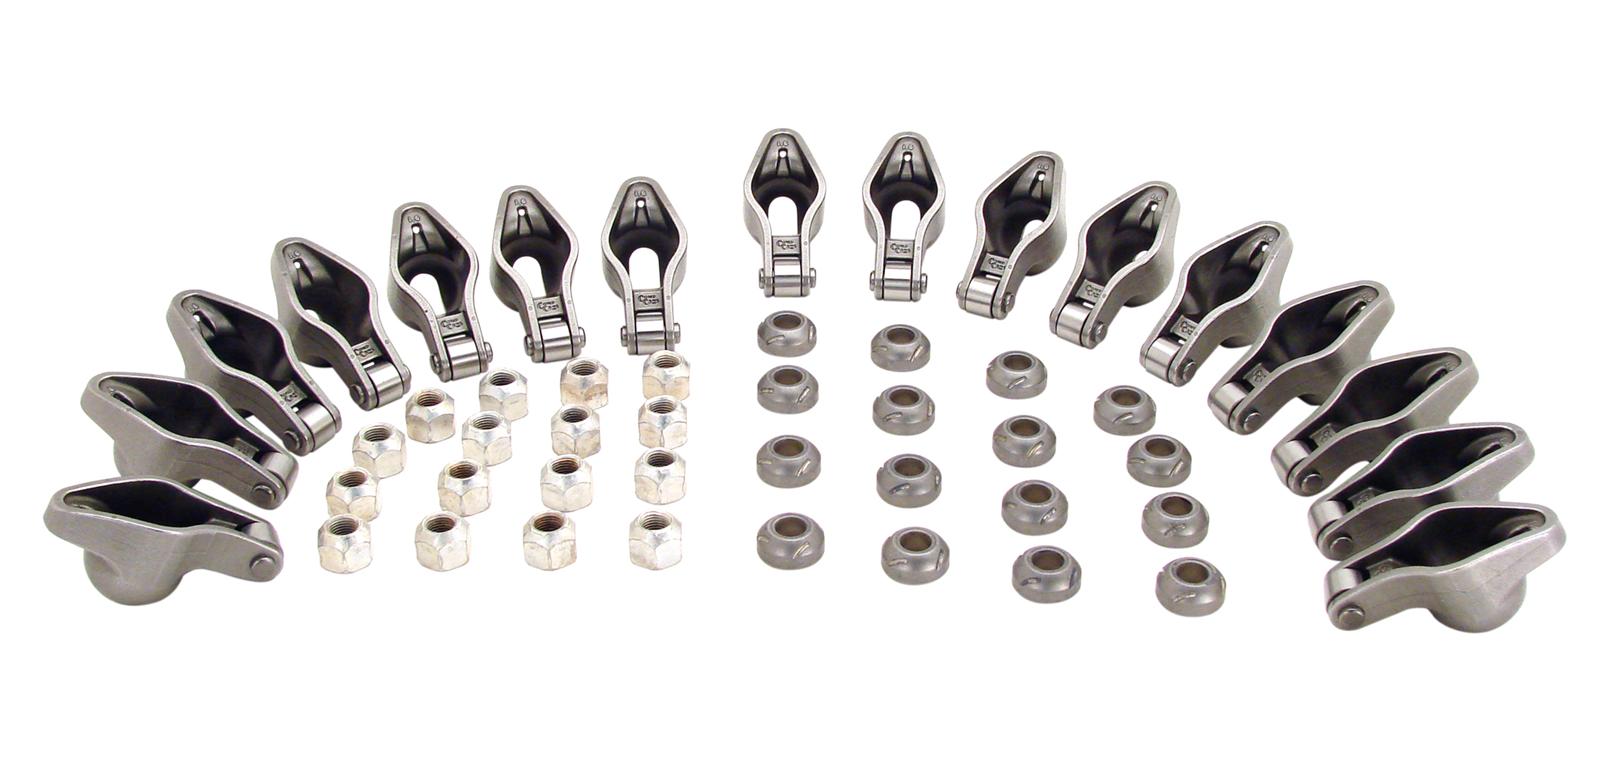 w/Nuts and Balls Chevy SBC 350 1.6 Ratio 3/8" Steel Roller Tip Rocker Arms Set